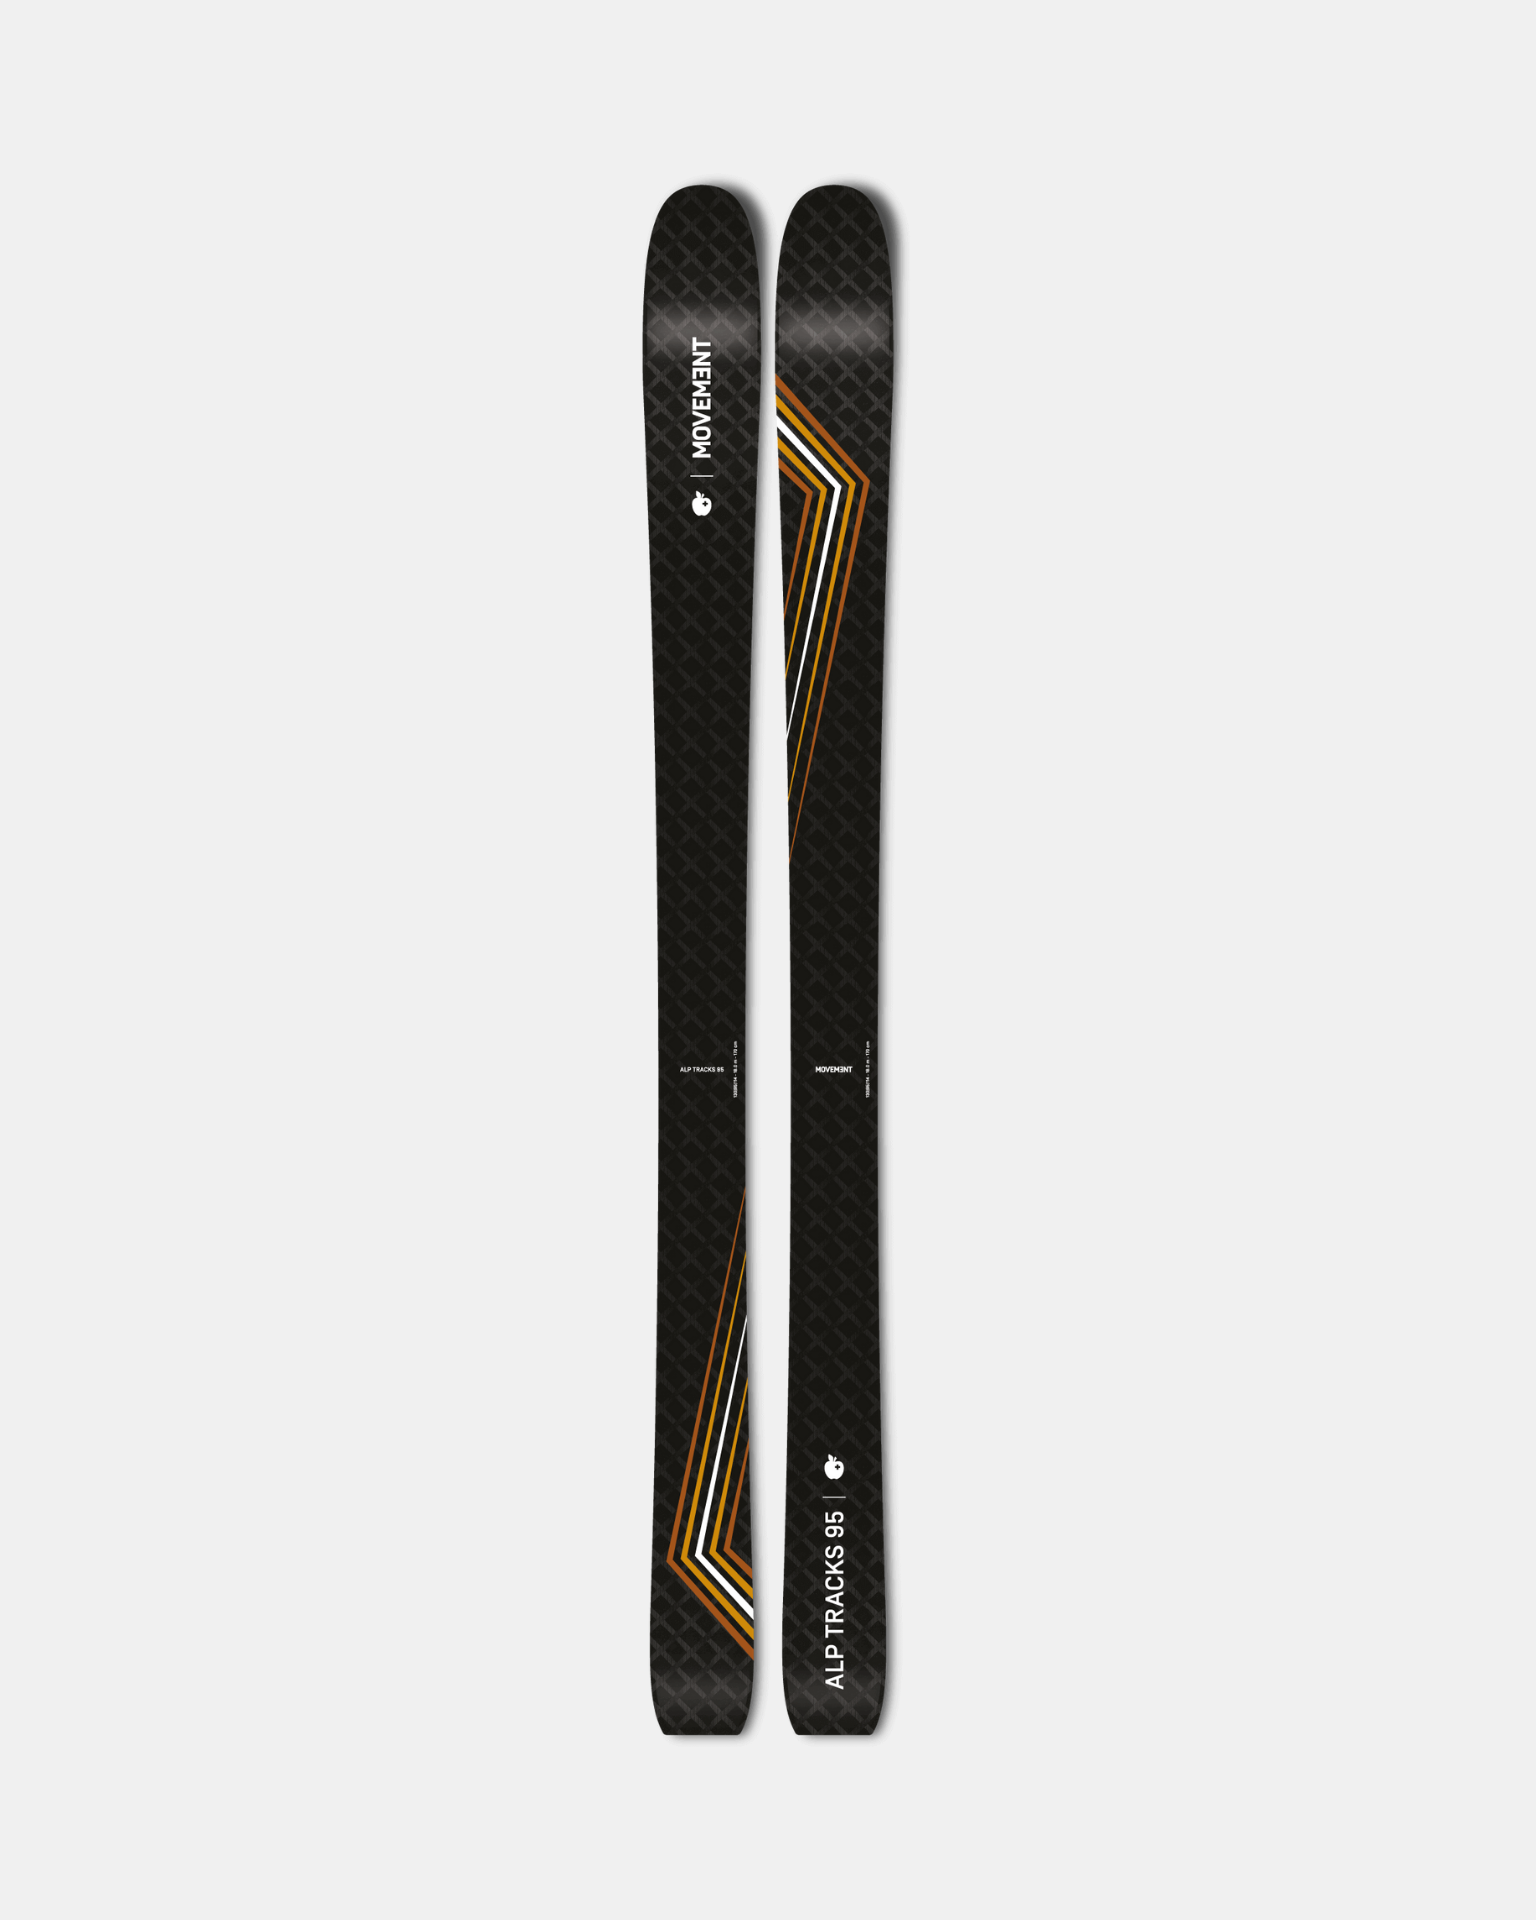 Experience Movement&#39;s renowned touring excellence through Alp Tracks 95 skis.